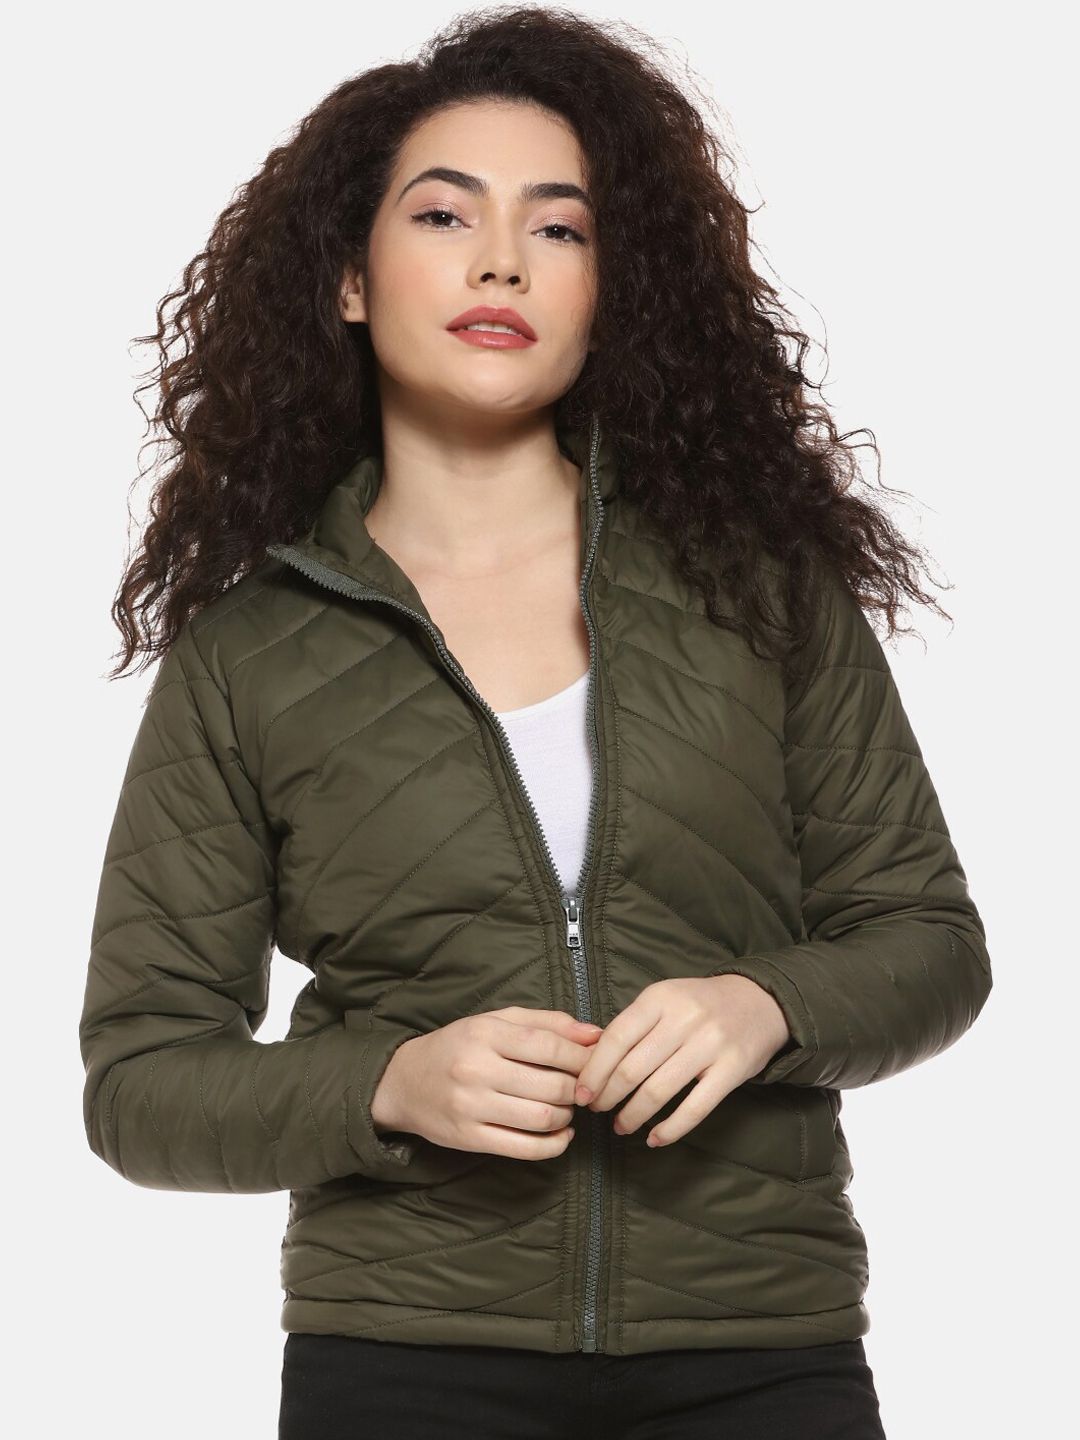 Campus Sutra Women Olive Green Padded Jacket Price in India